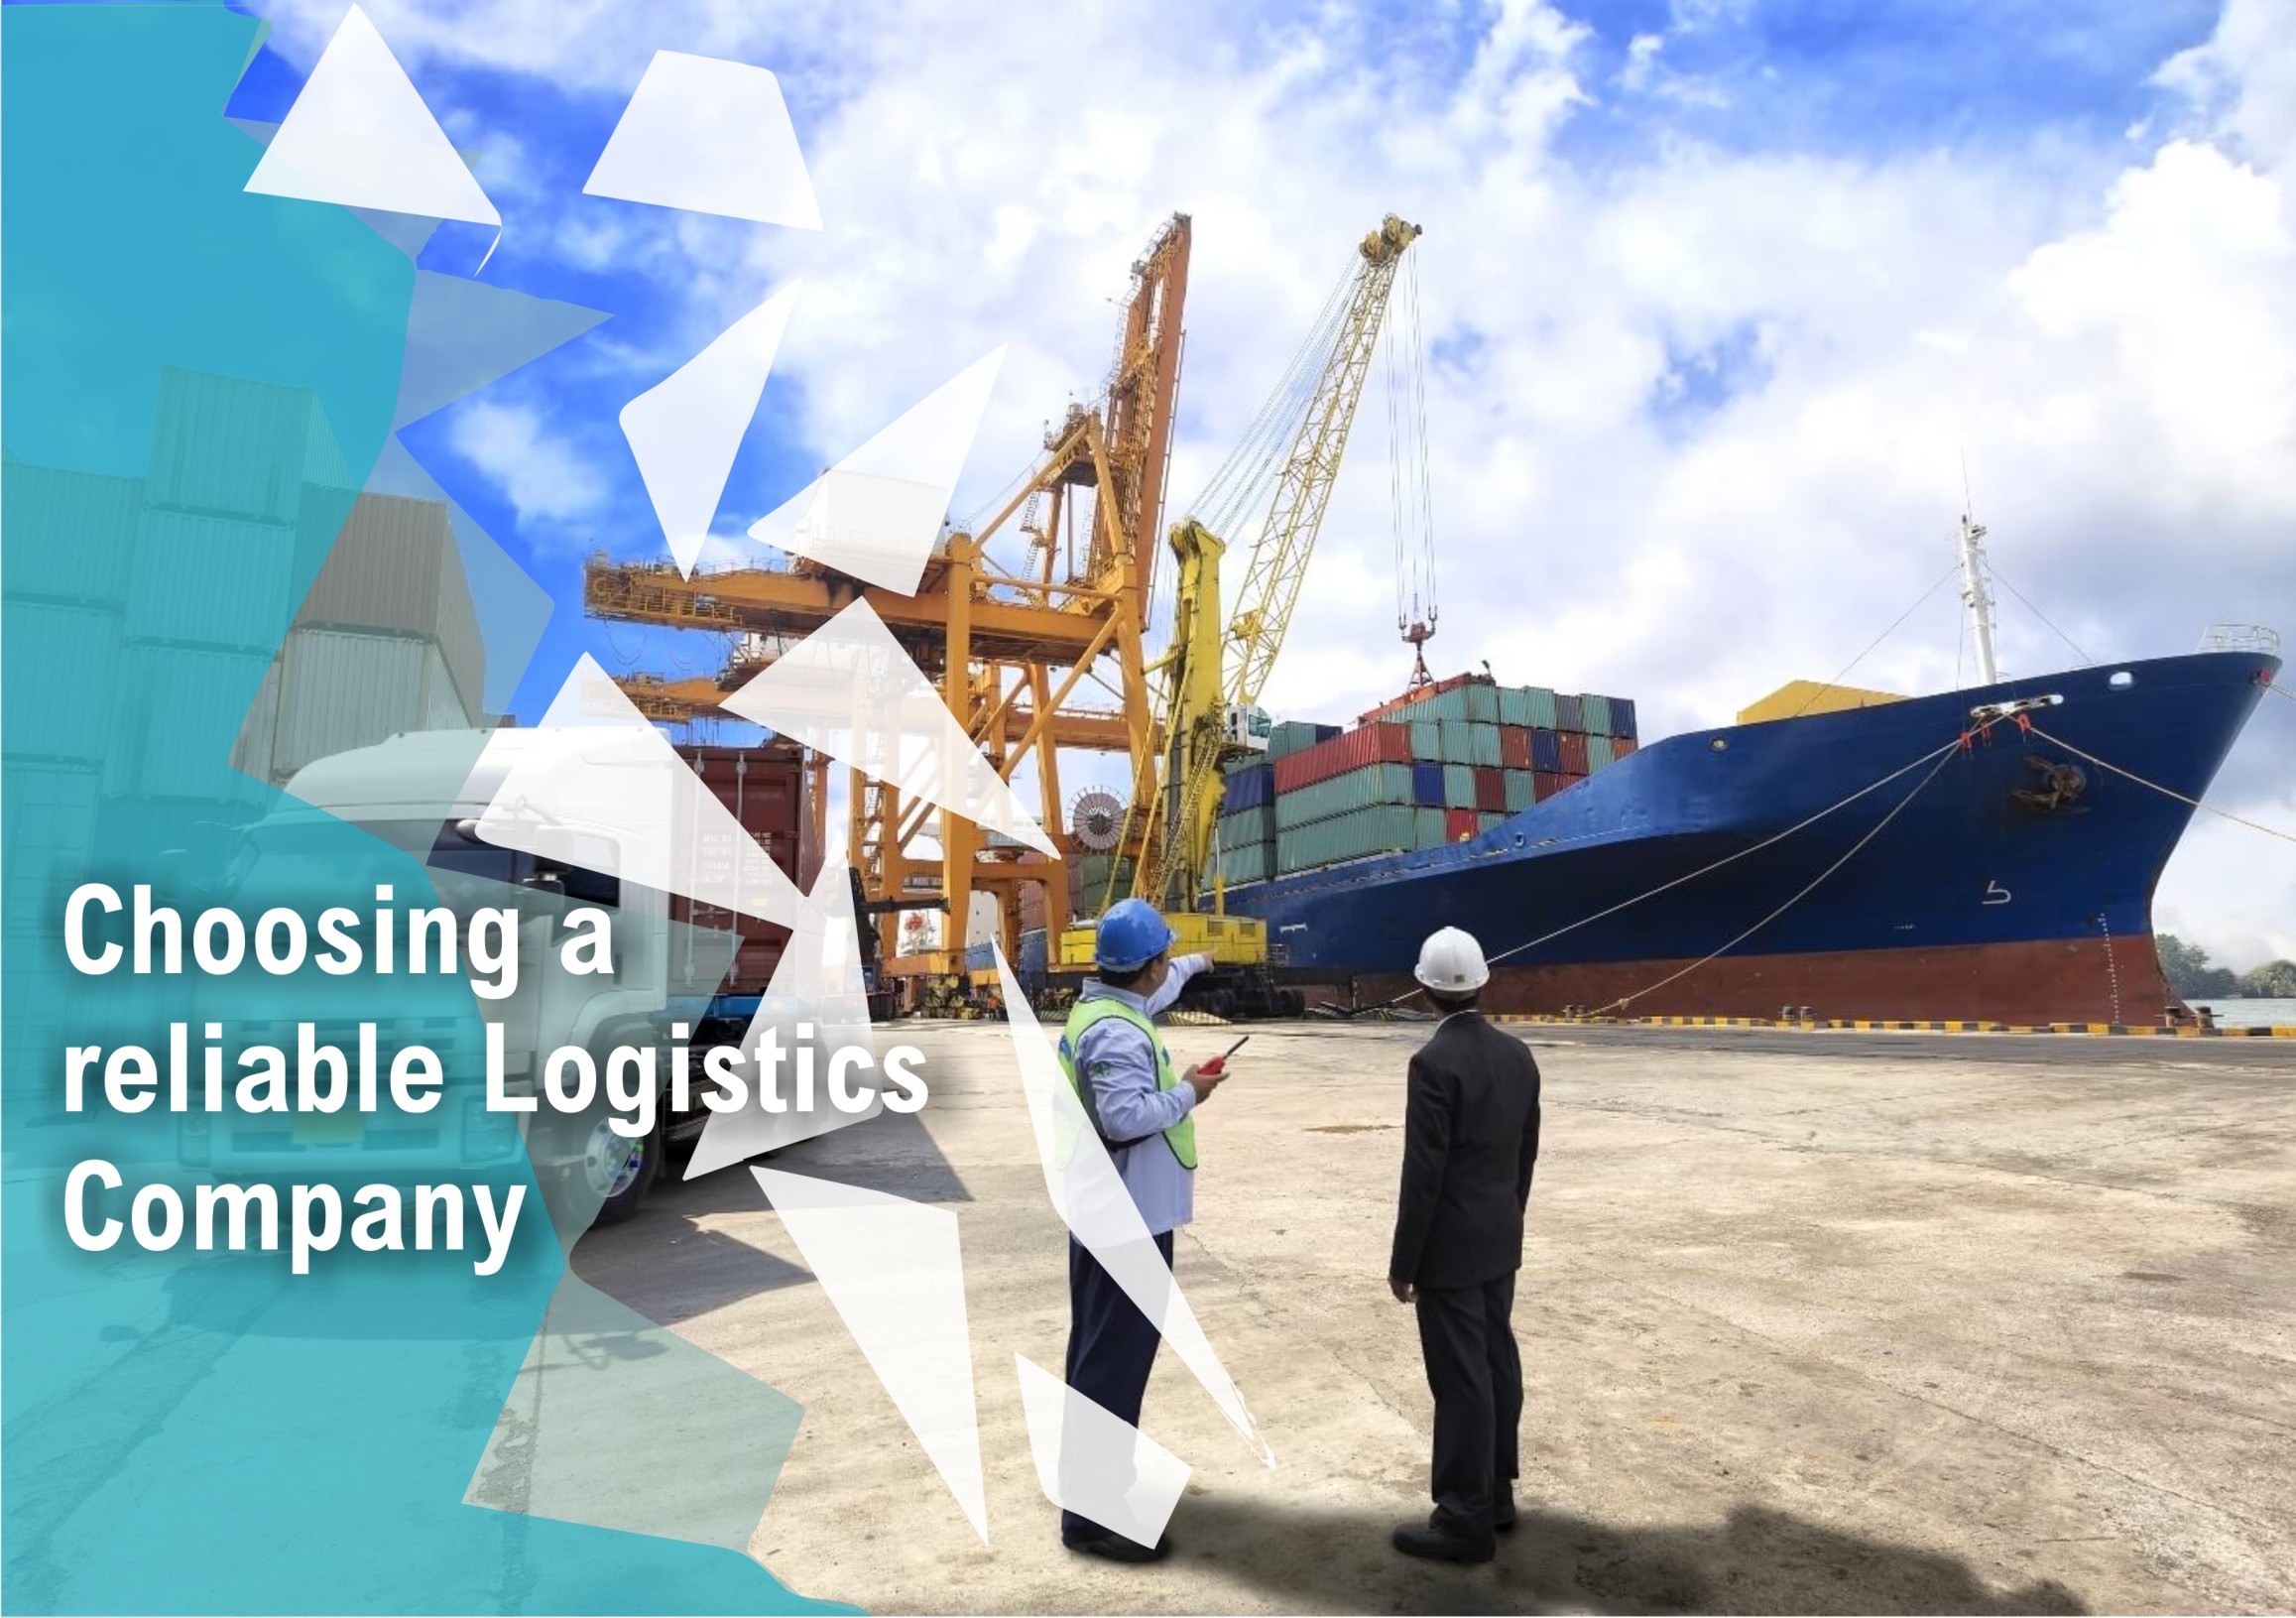 How to Choose a Reliable Logistics Partner